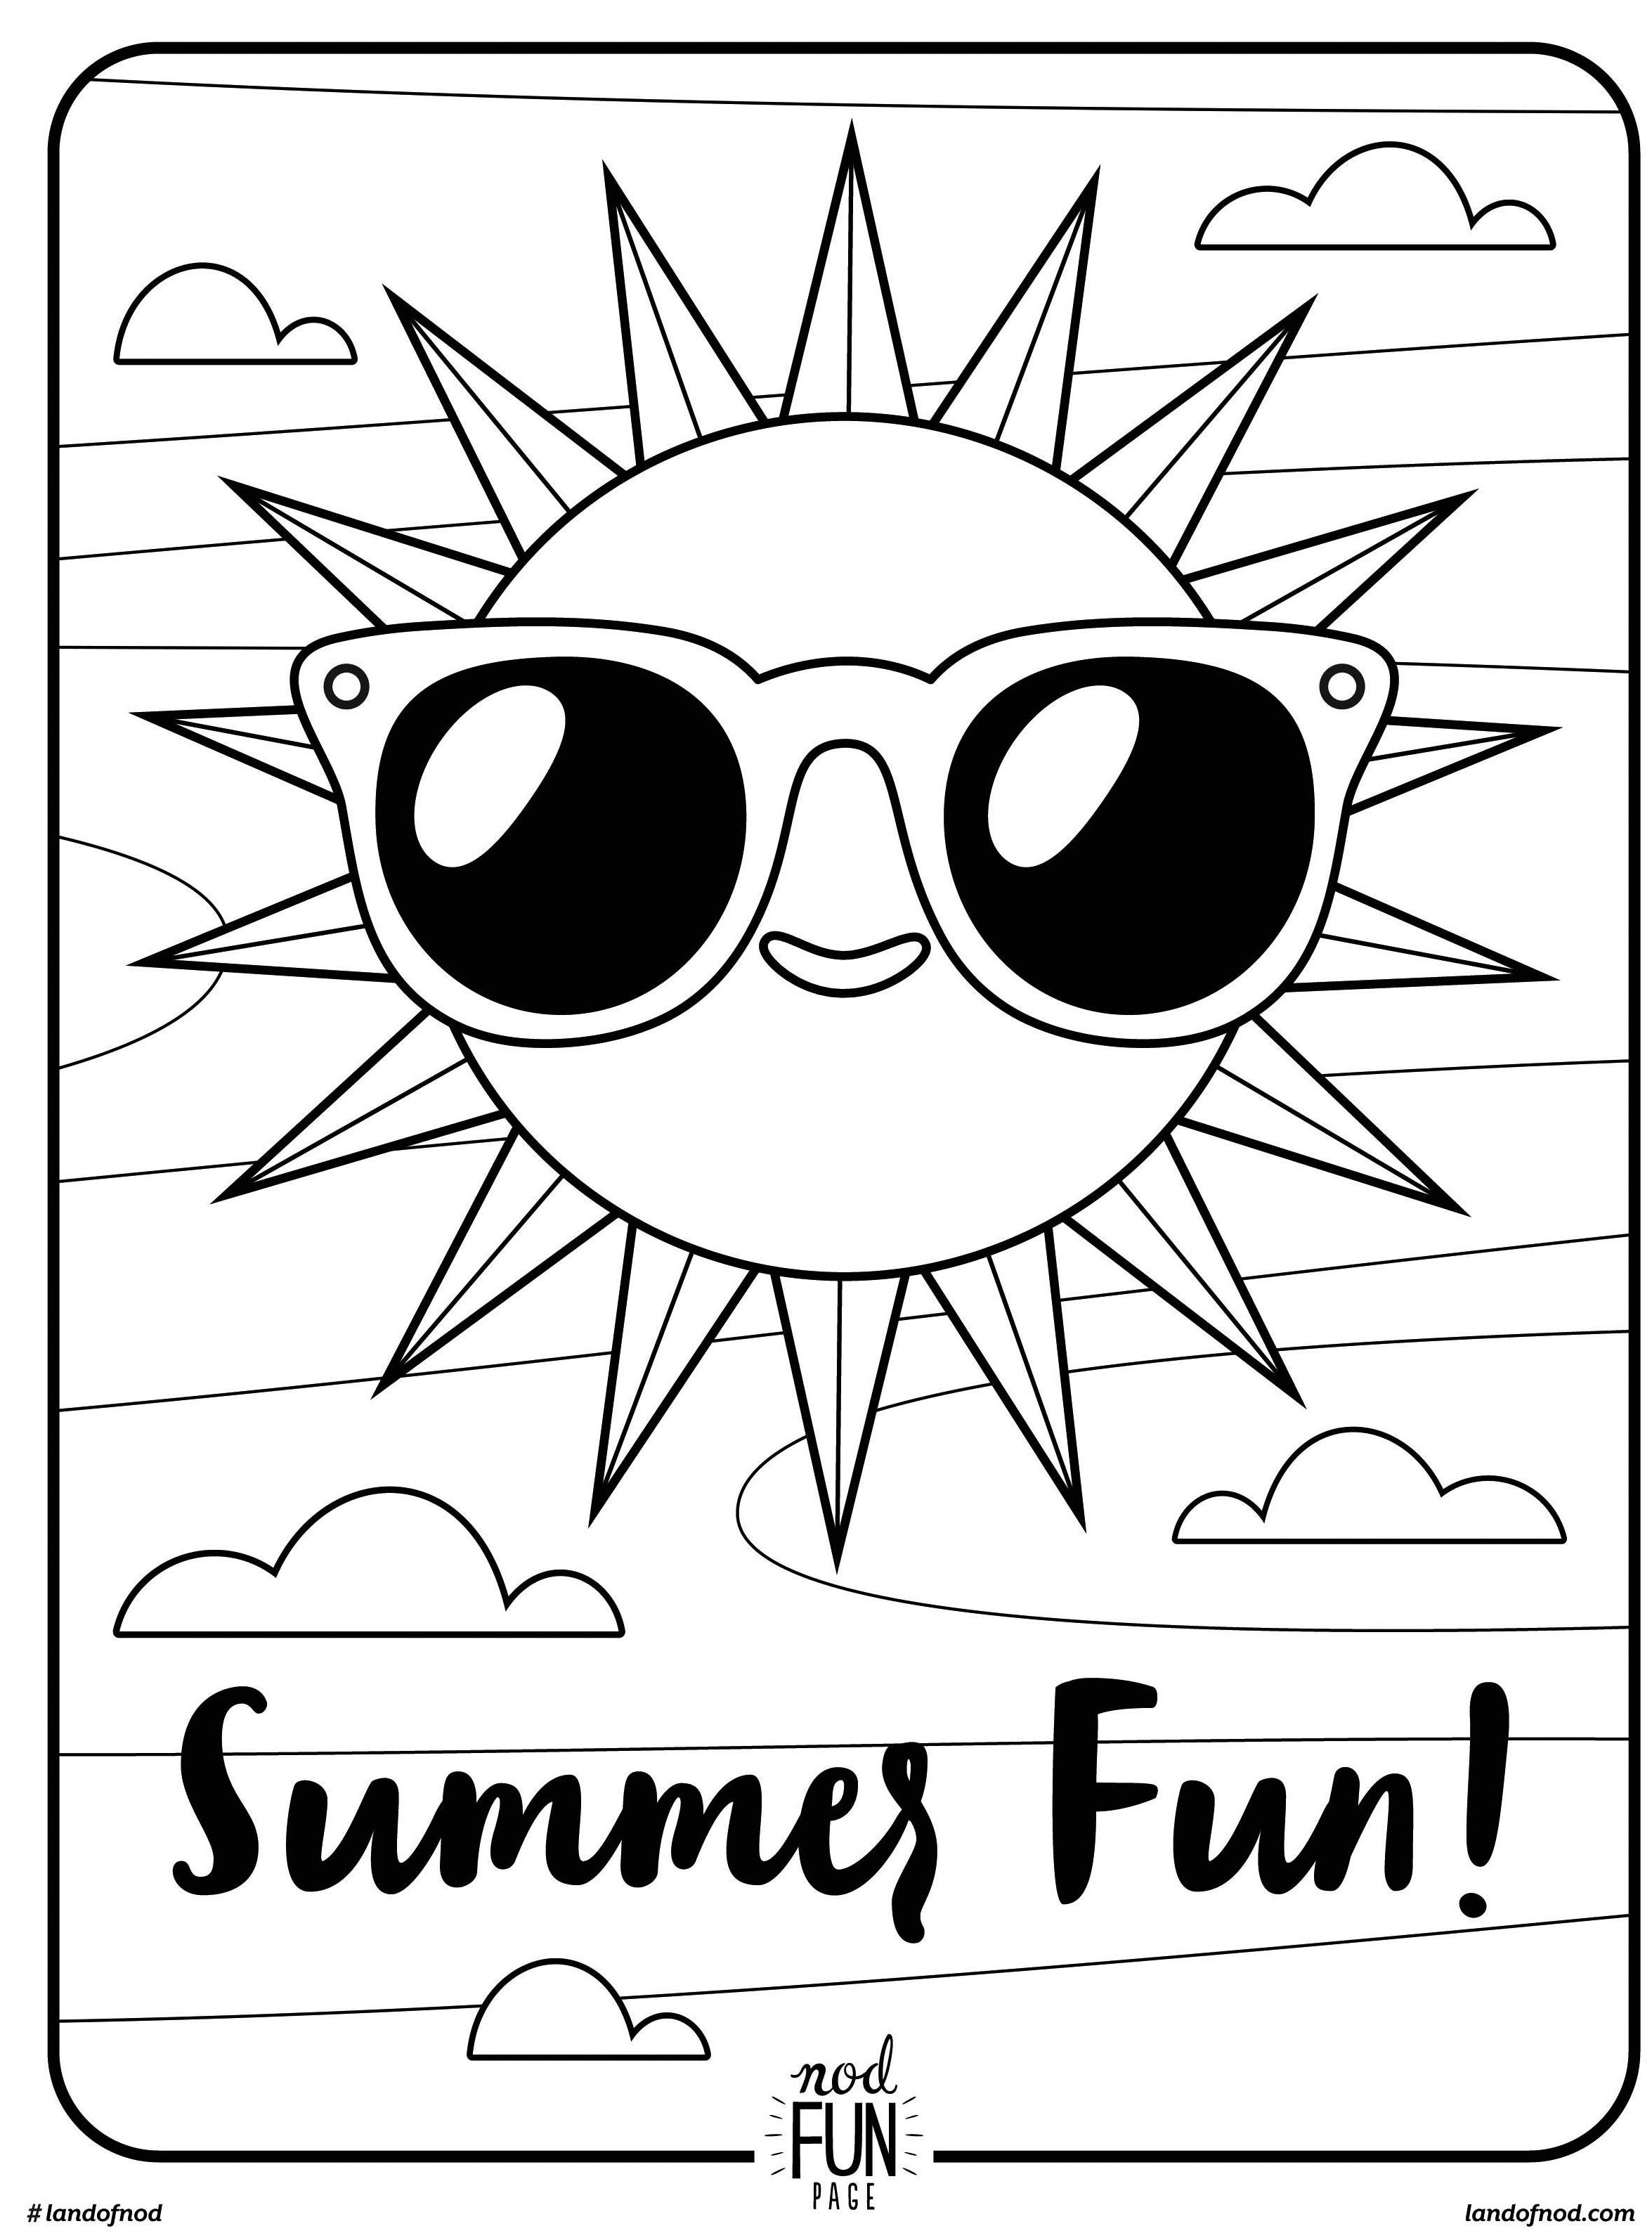 Coloring Pages : Fun Printable Coloring Pages For Kids Animals Girls - Free Printable Summer Coloring Pages For Adults